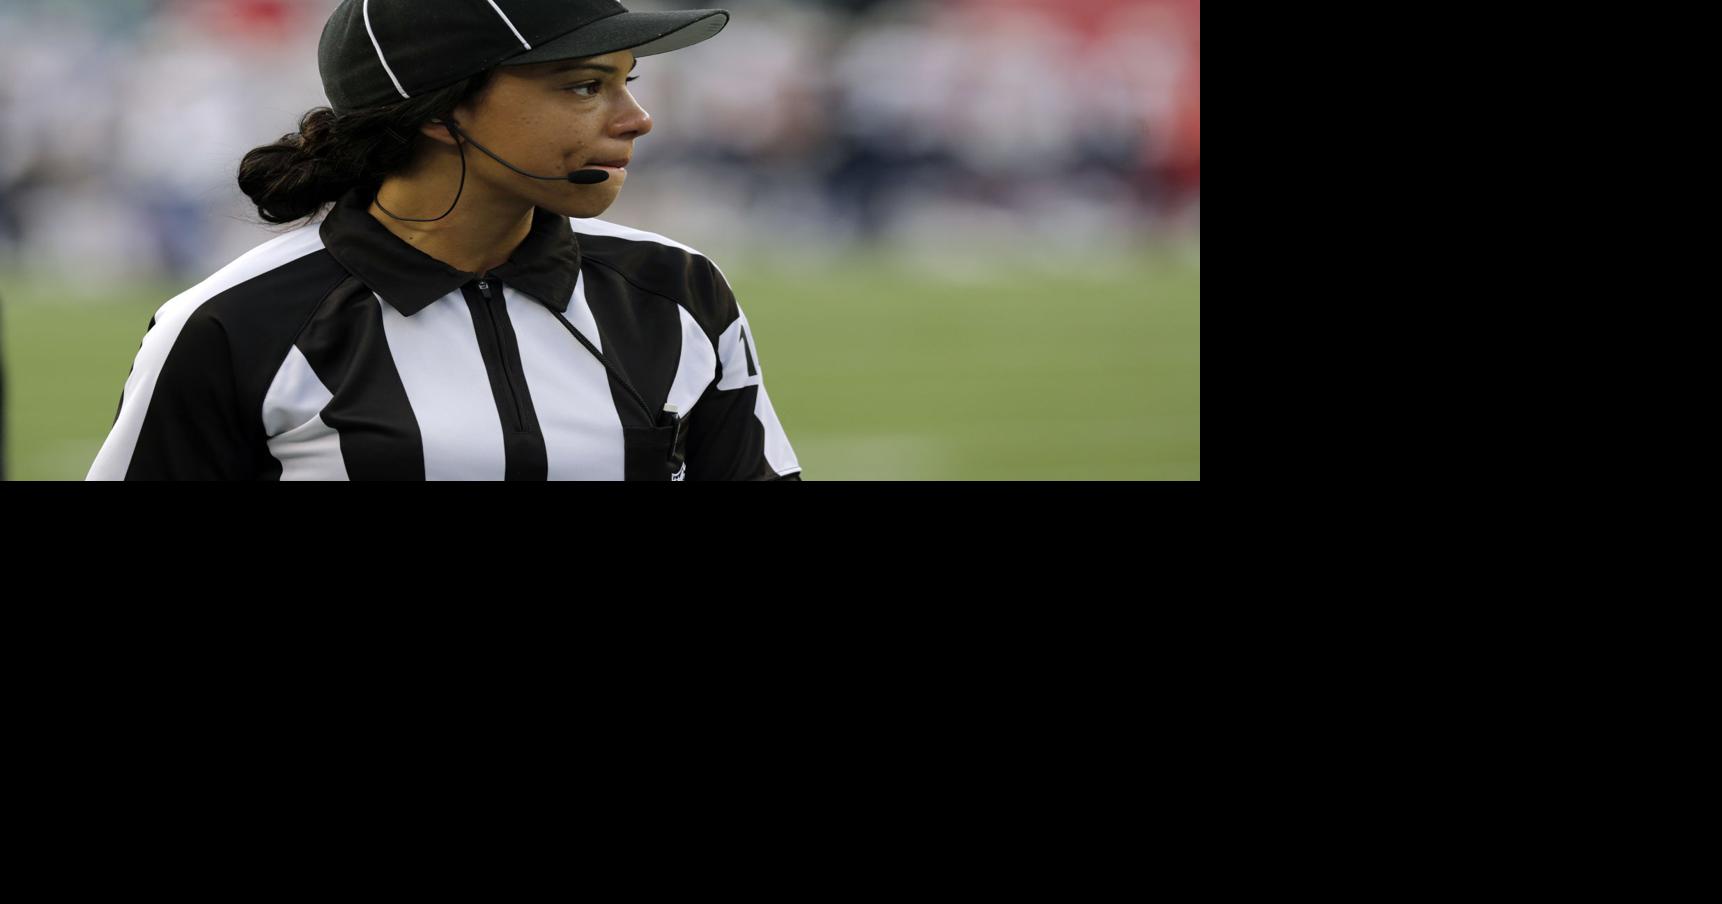 Panthers-Jets had first Black woman to referee NFL game